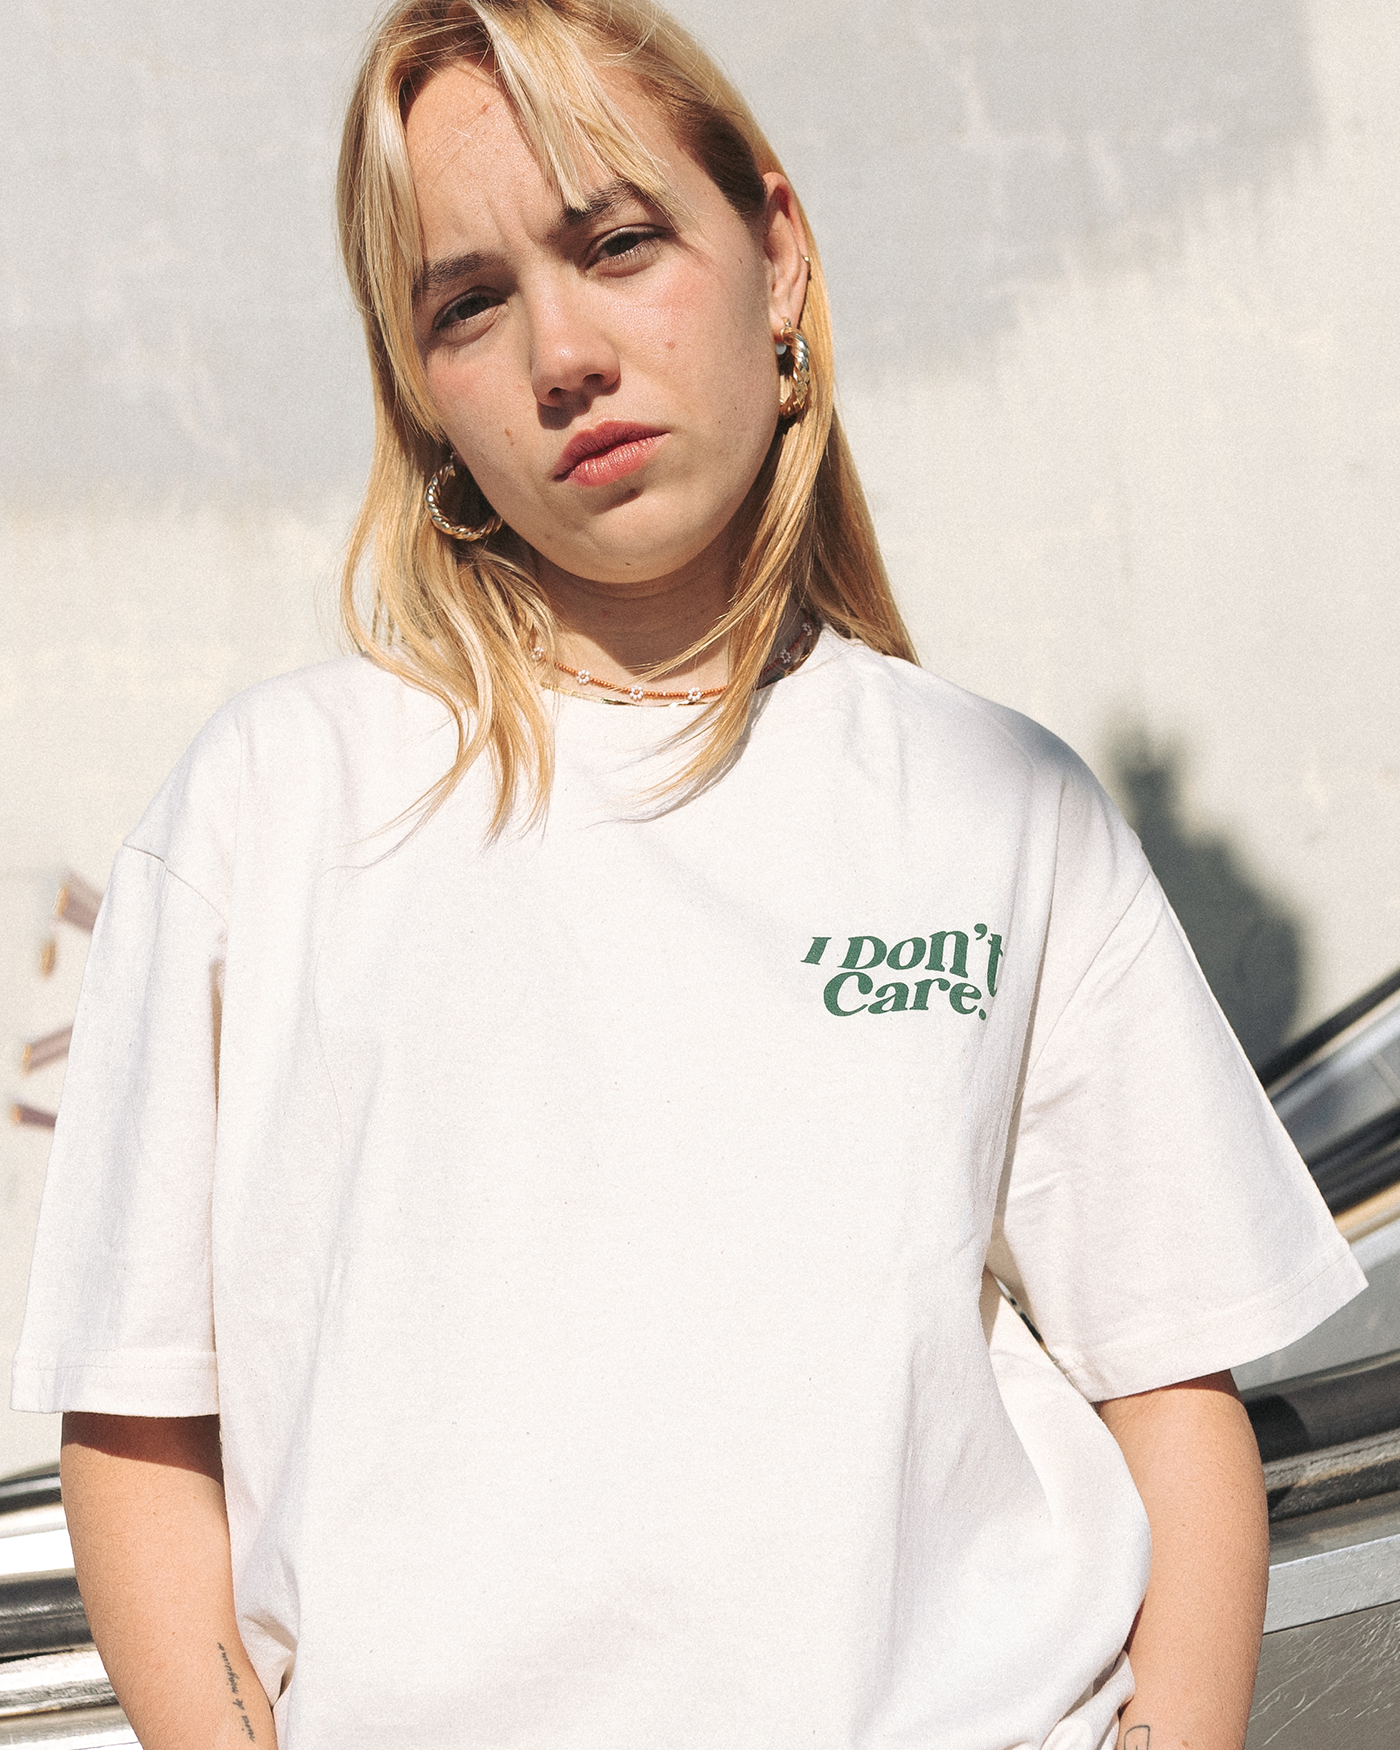 I don't care Tee